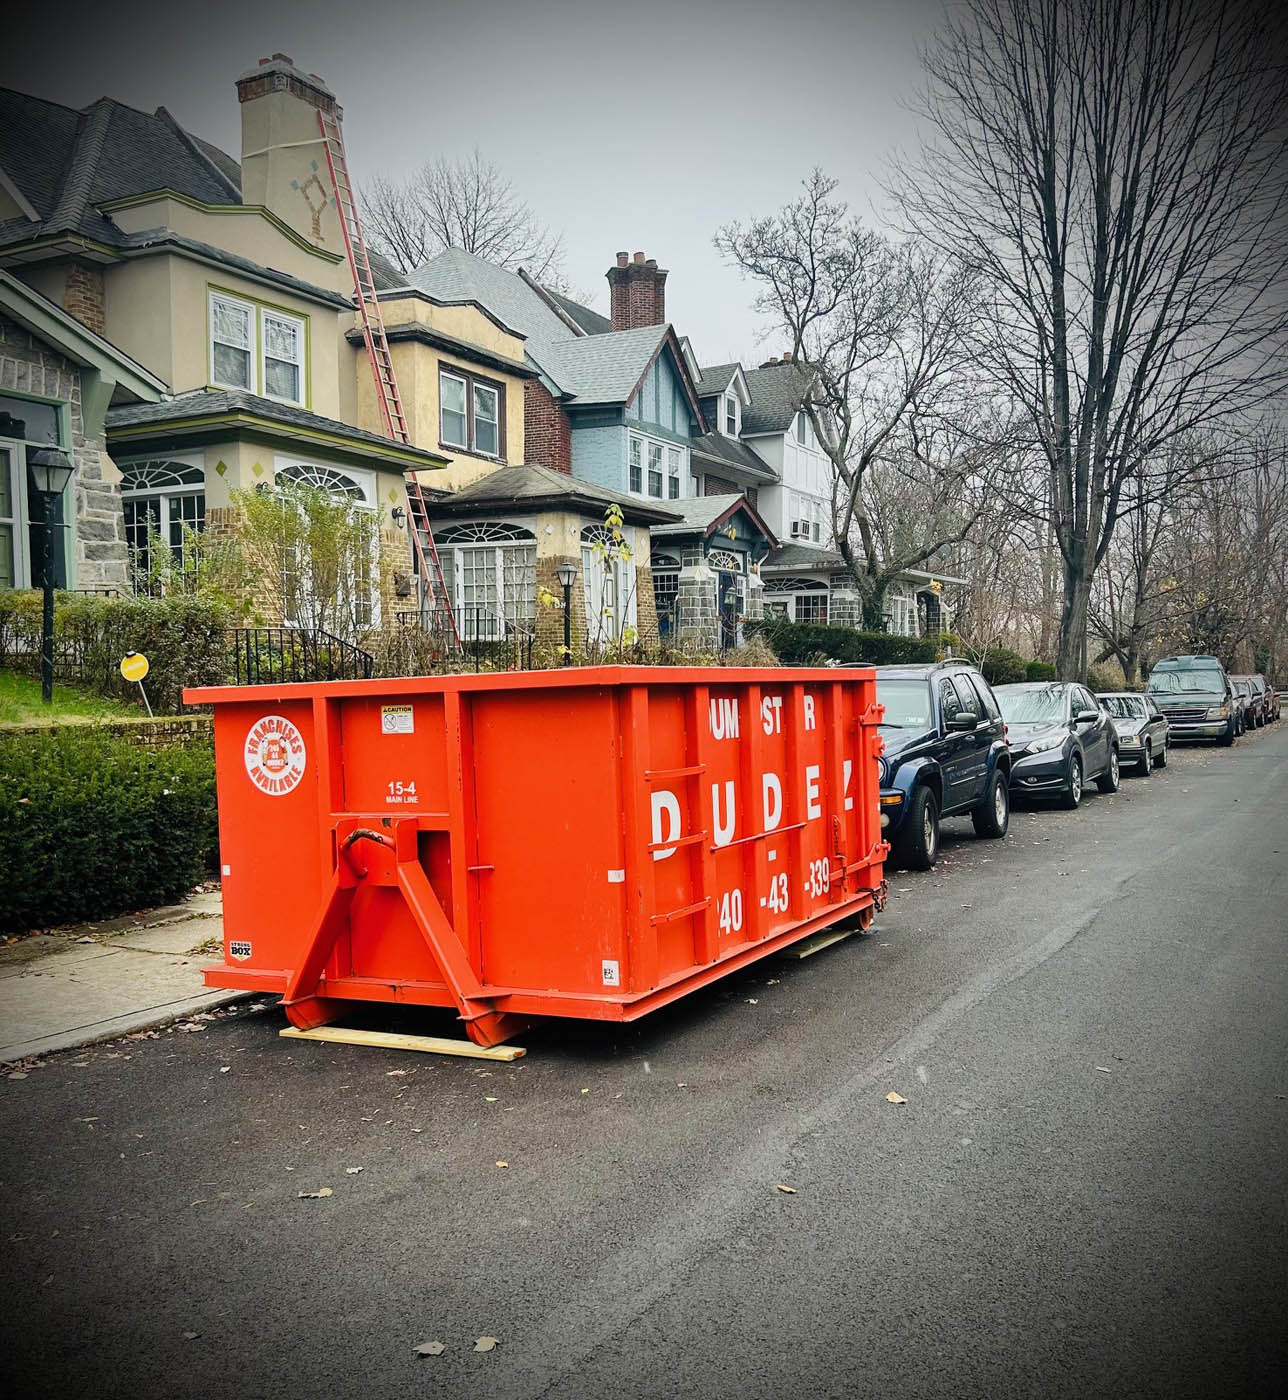 
				A 20 yard dumpster in front of a residential home.
			